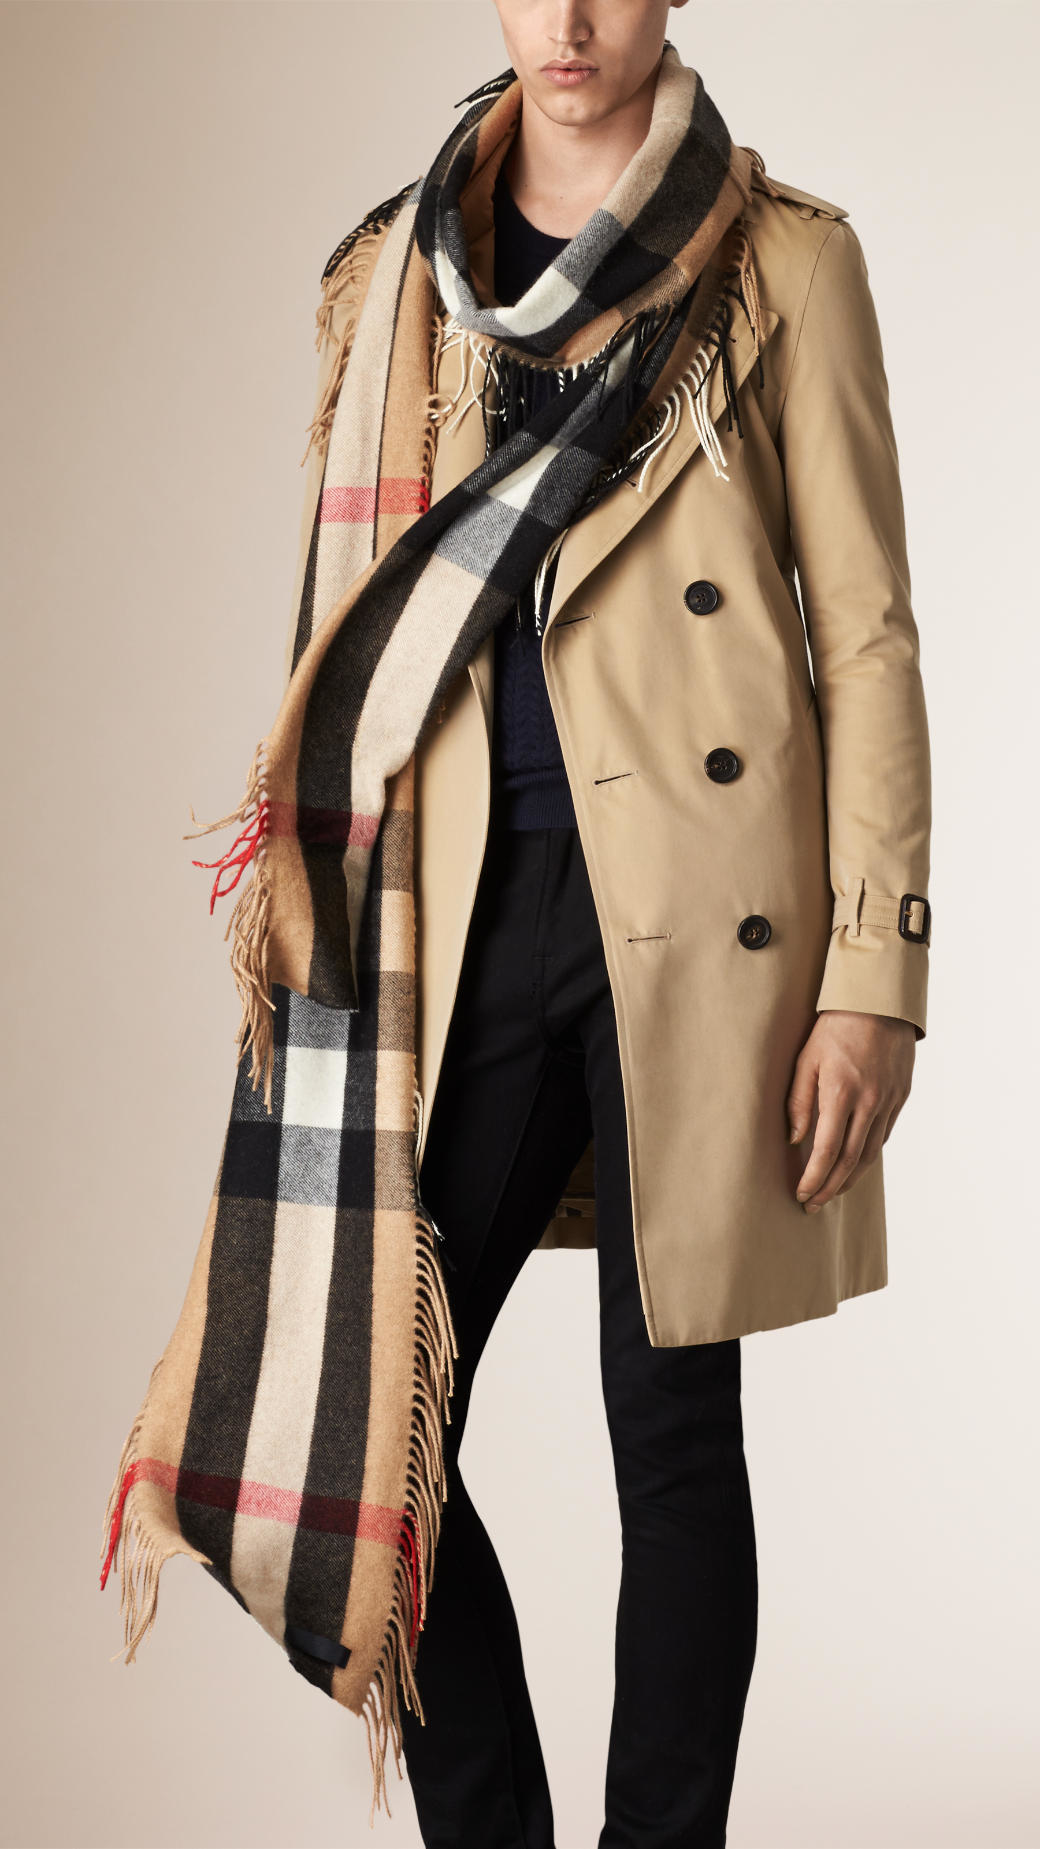 Burberry The Long Fringe Scarf In Check Cashmere in Camel (Brown) - Lyst